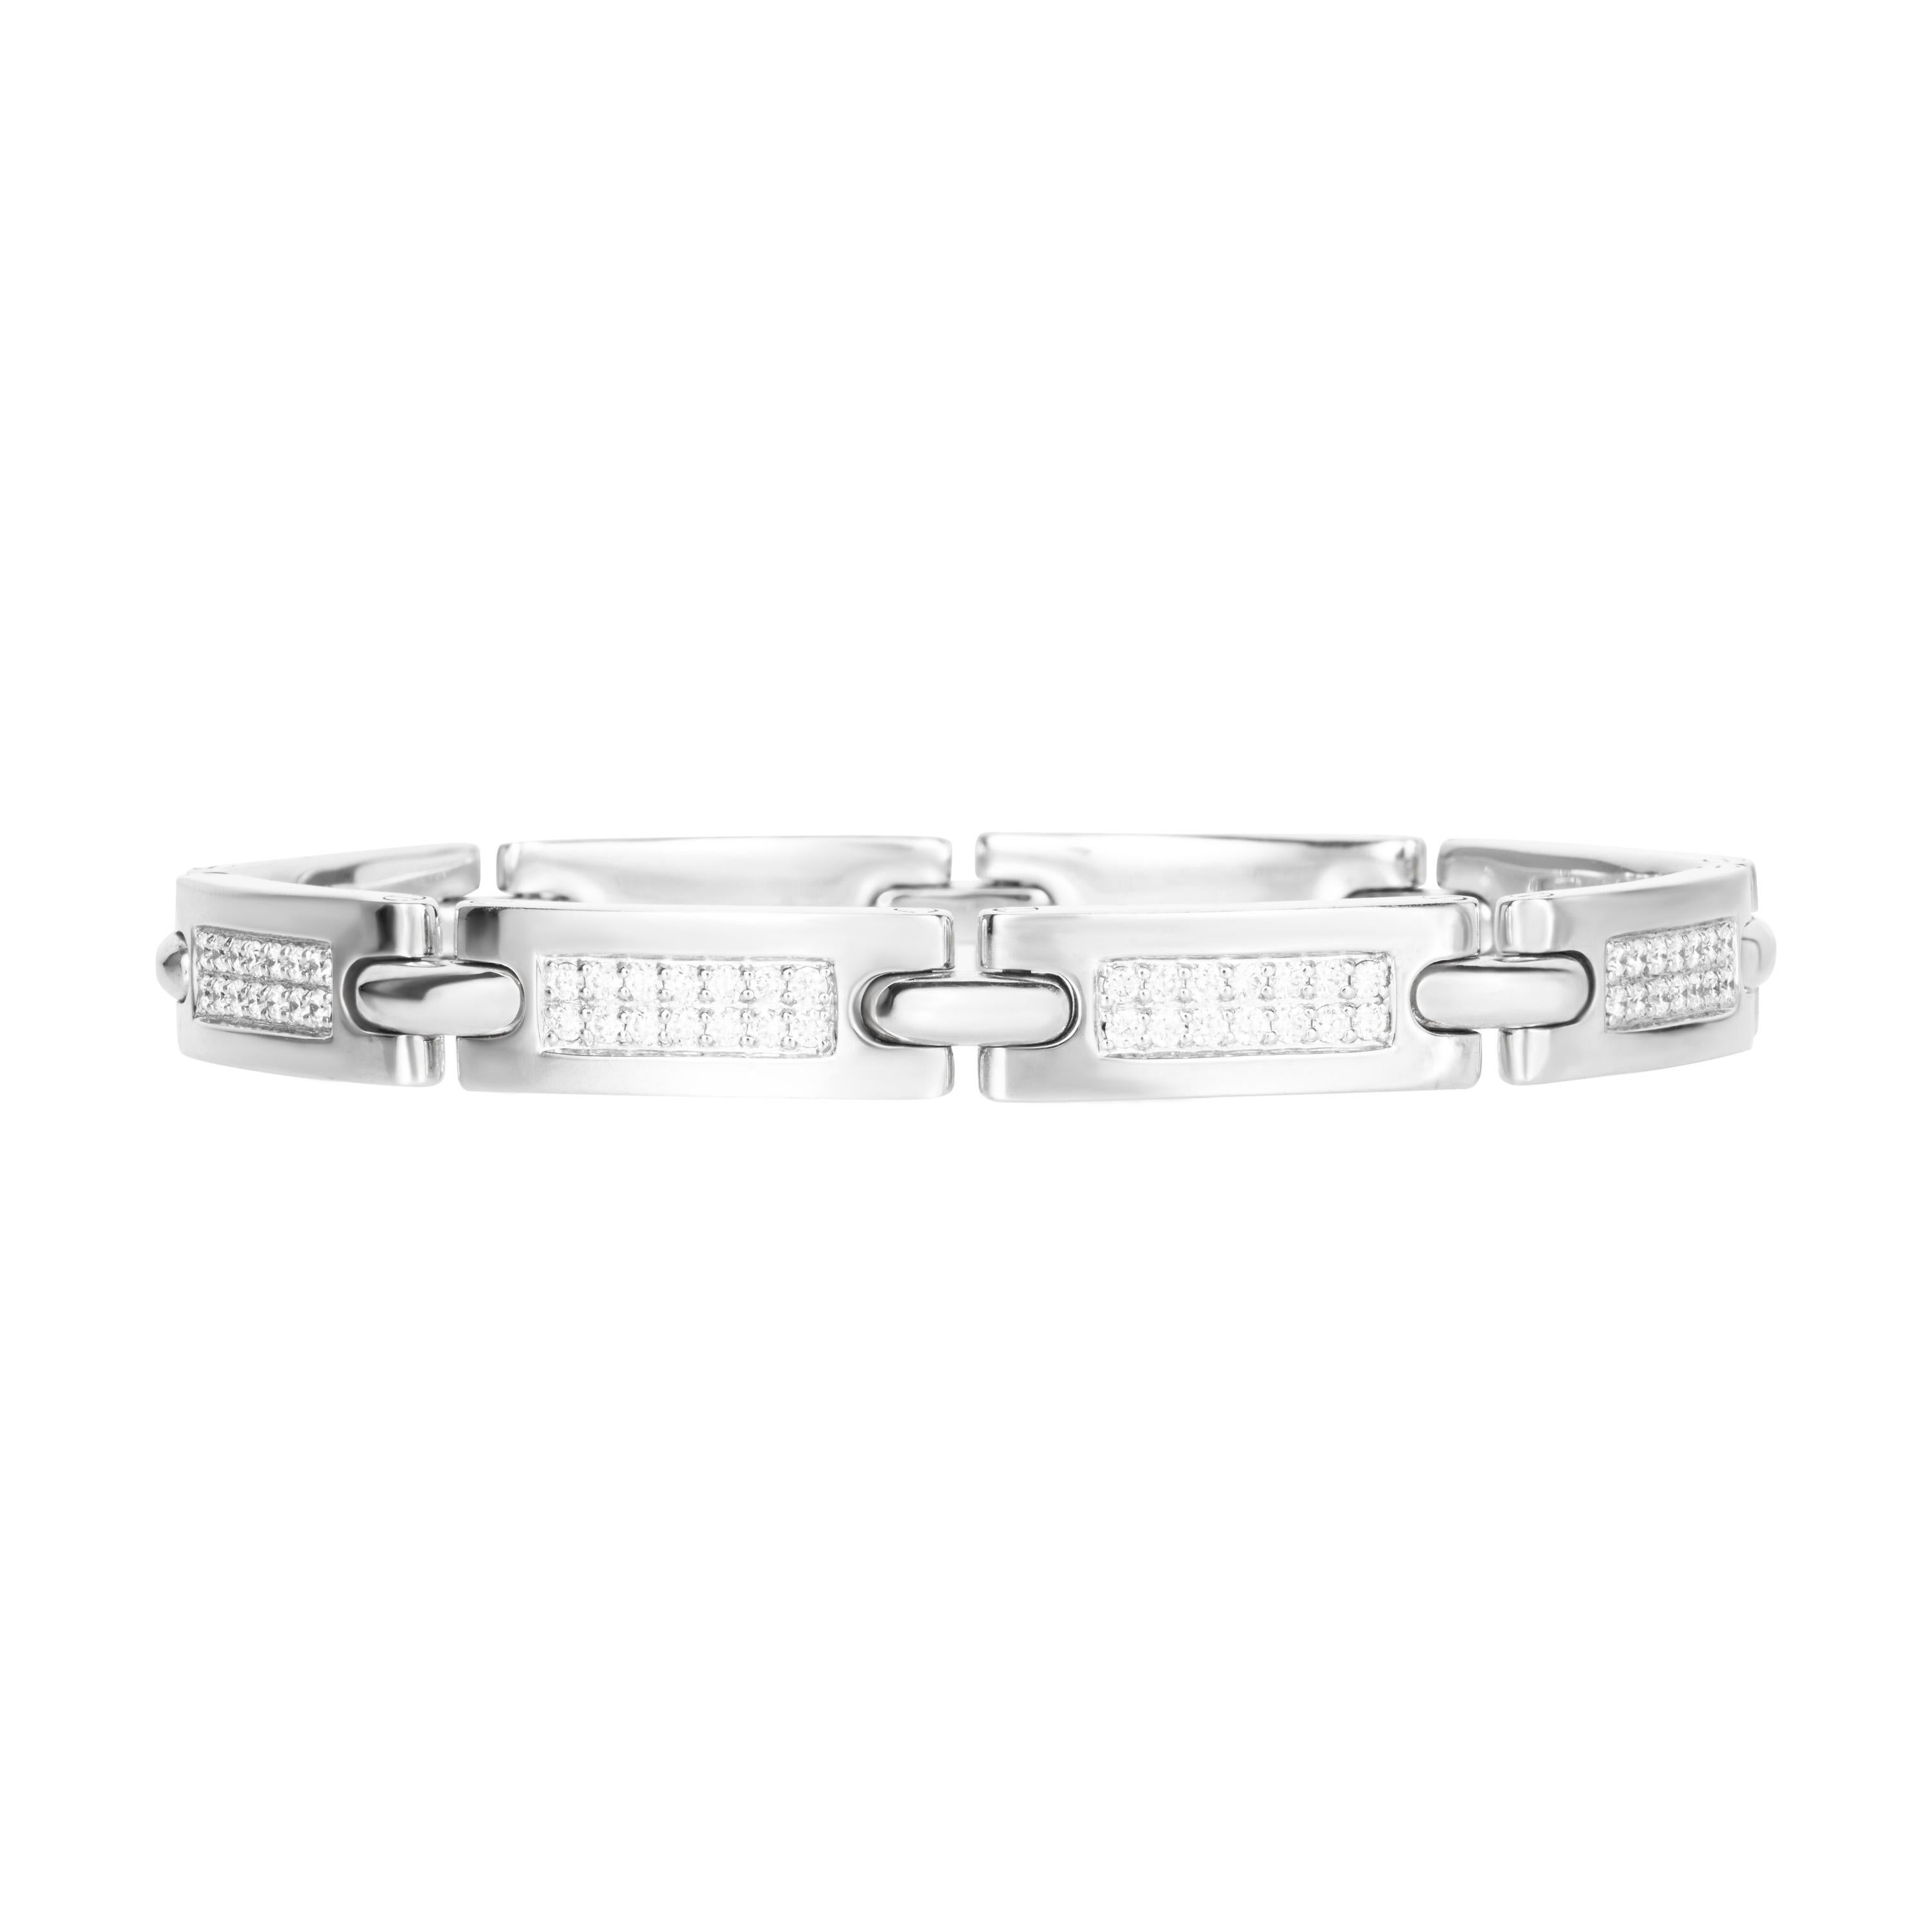 Sparkling round diamond link bracelet with 2.38 carats of brilliant cut round diamonds set in 18-karat white gold.  Great for stacking with other bracelets.  Length: 8 inches.

Composition:
18K White Gold
112 Round Diamonds: 2.38 carats
Diamond